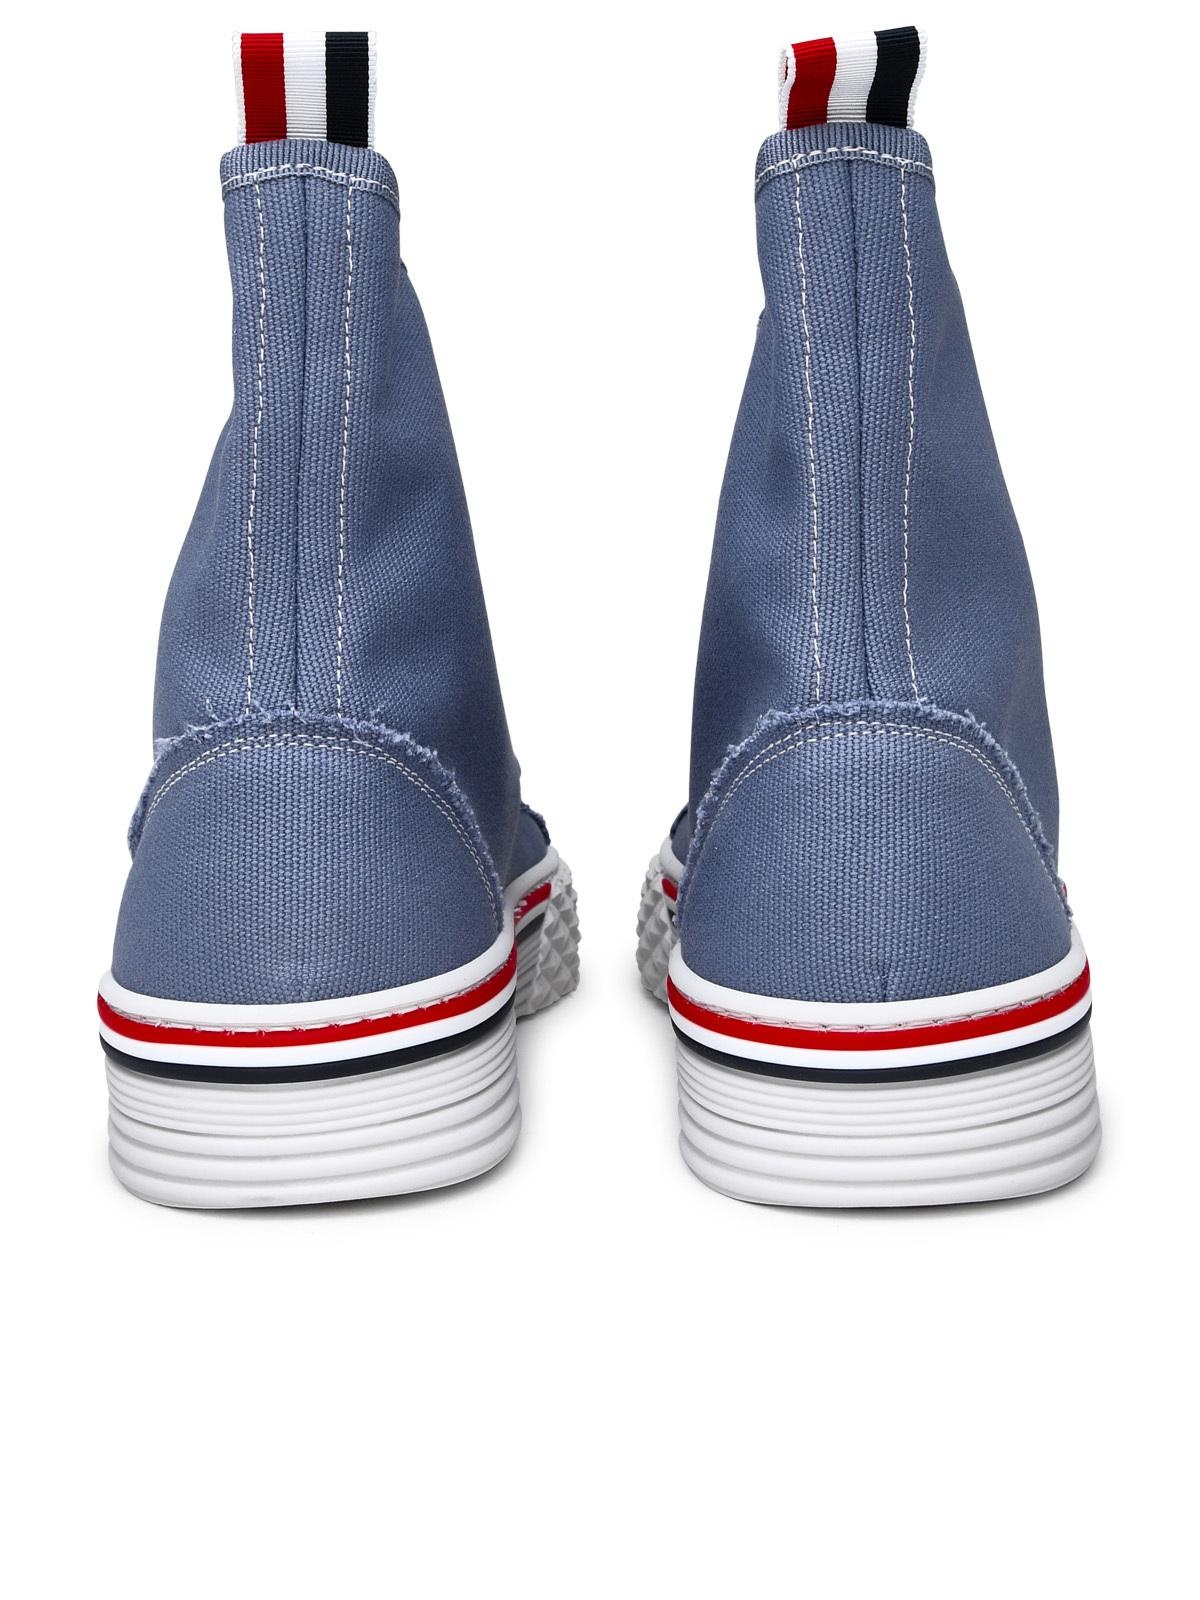 Thom Browne Sneakers In Light Blue Canvas Man - 4